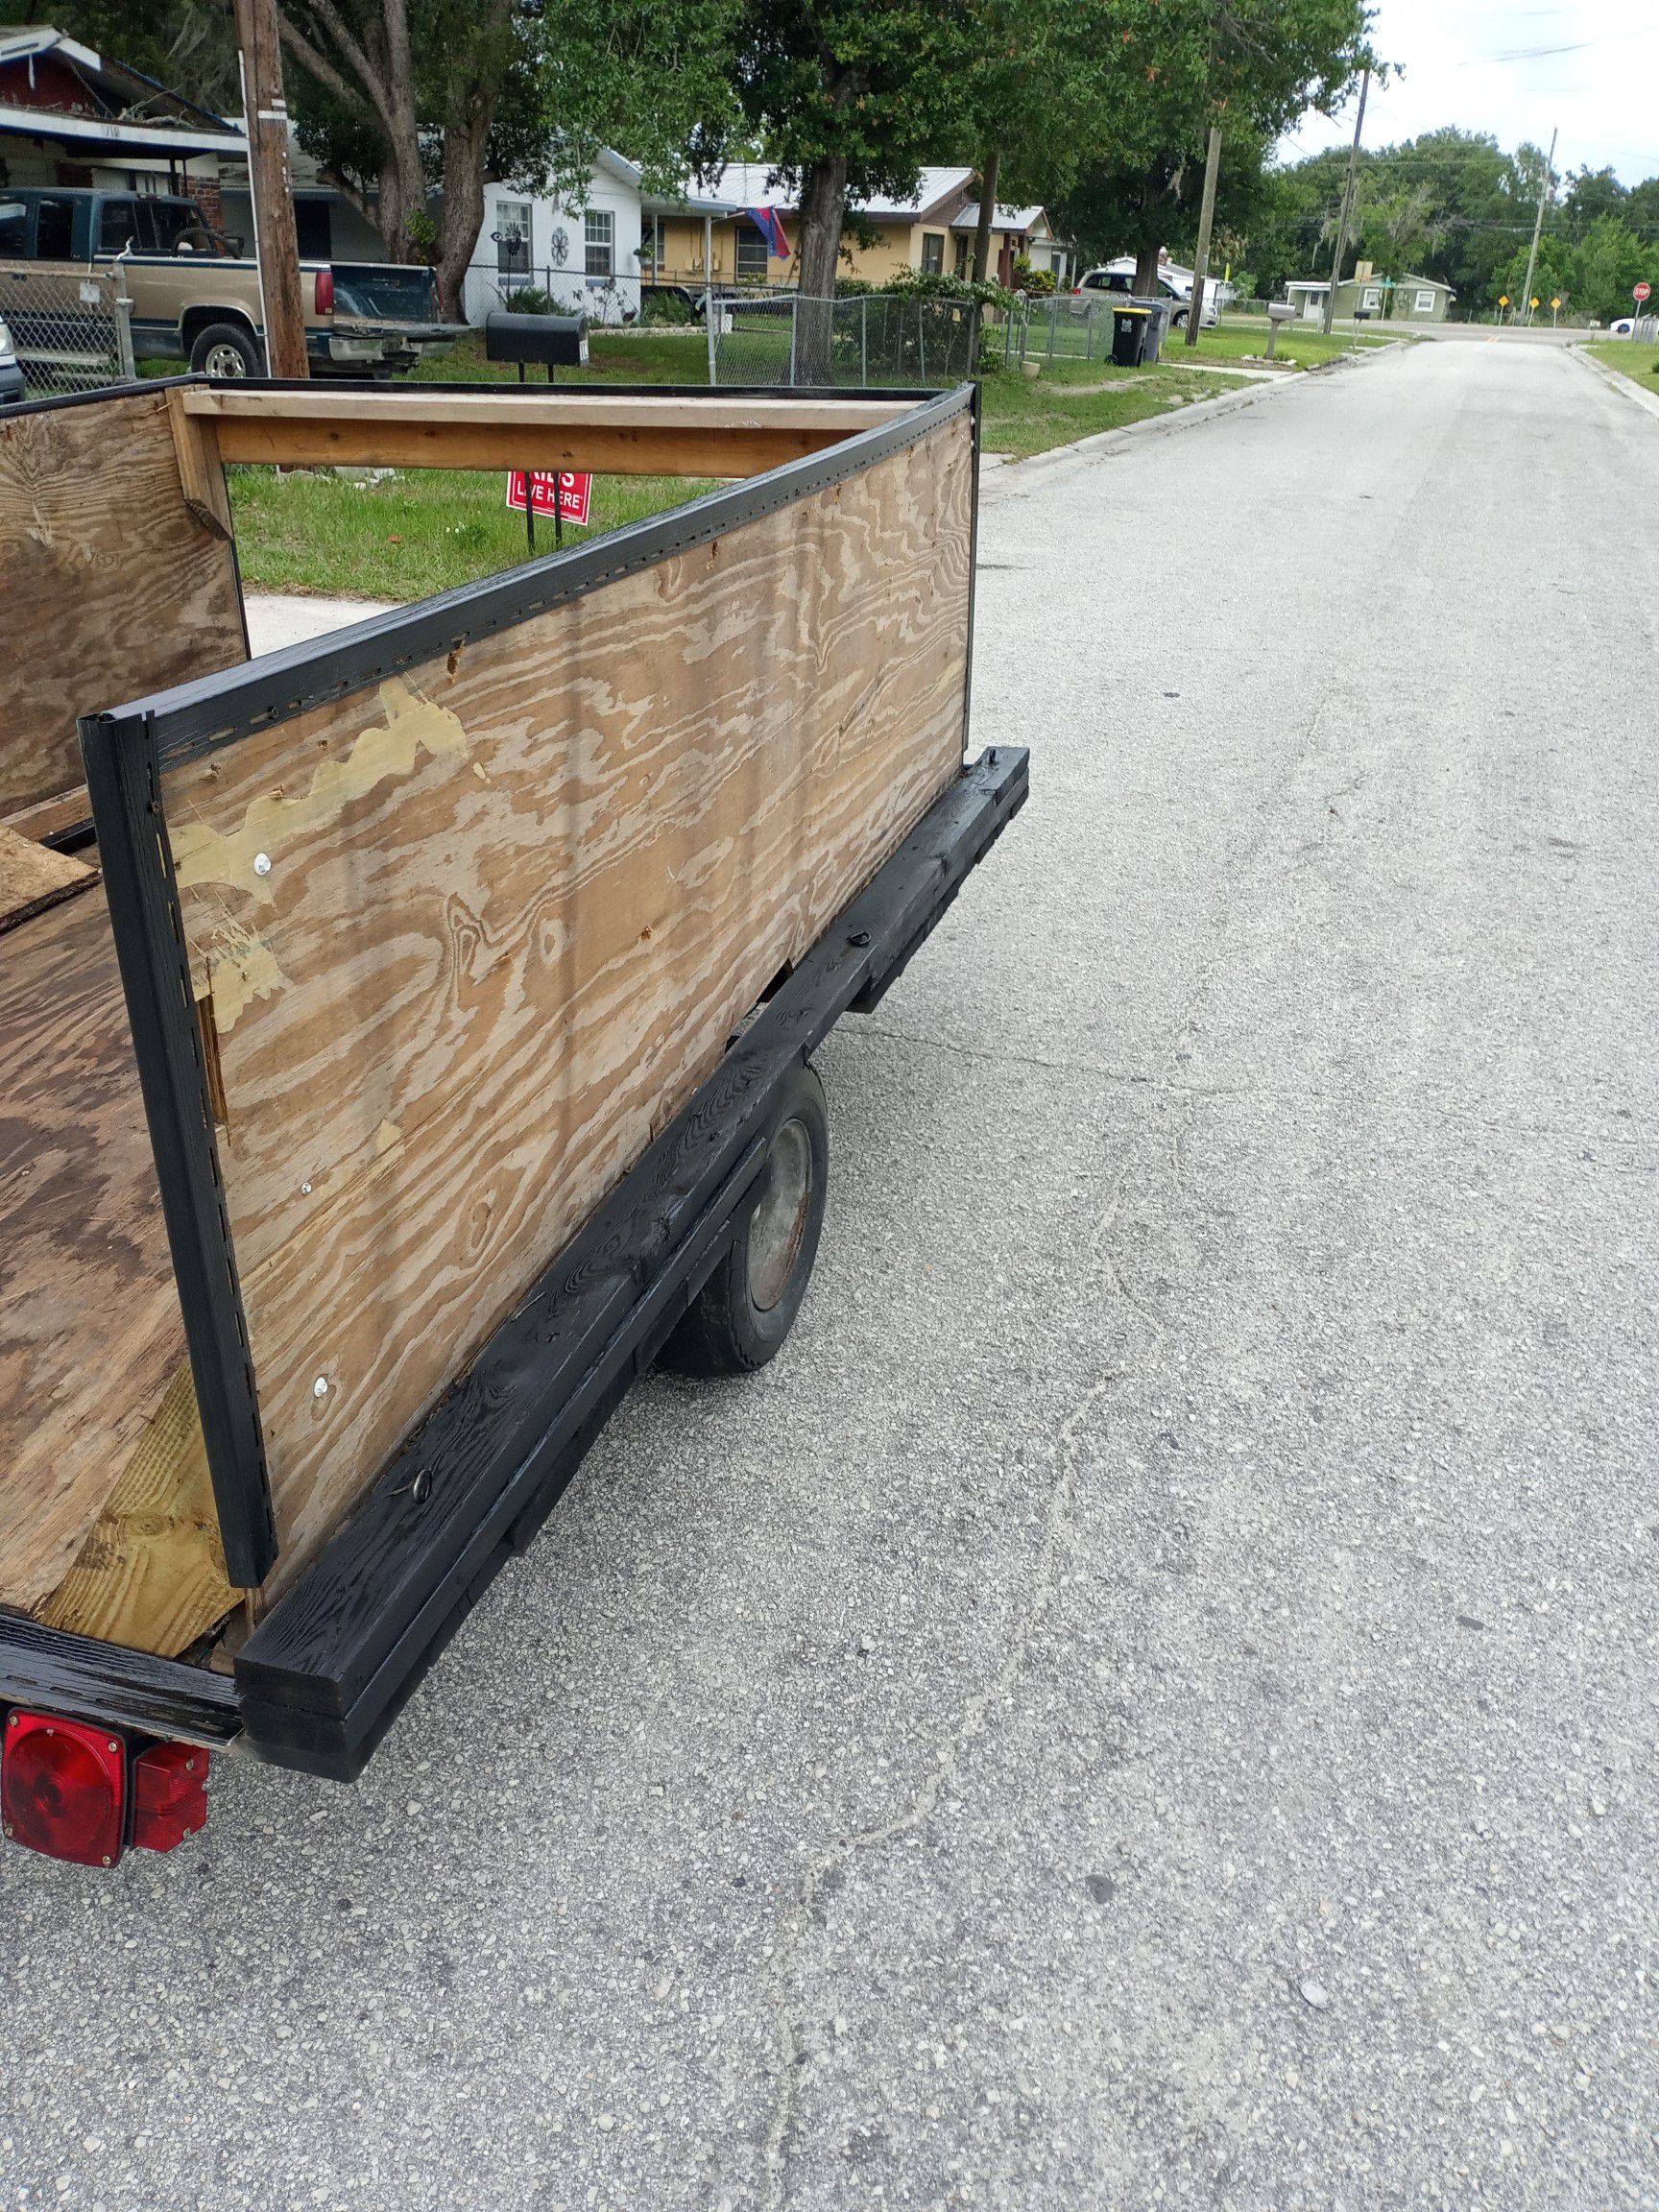 Strong sturdy 9 by 6 trailer. With spare tires. And working lights